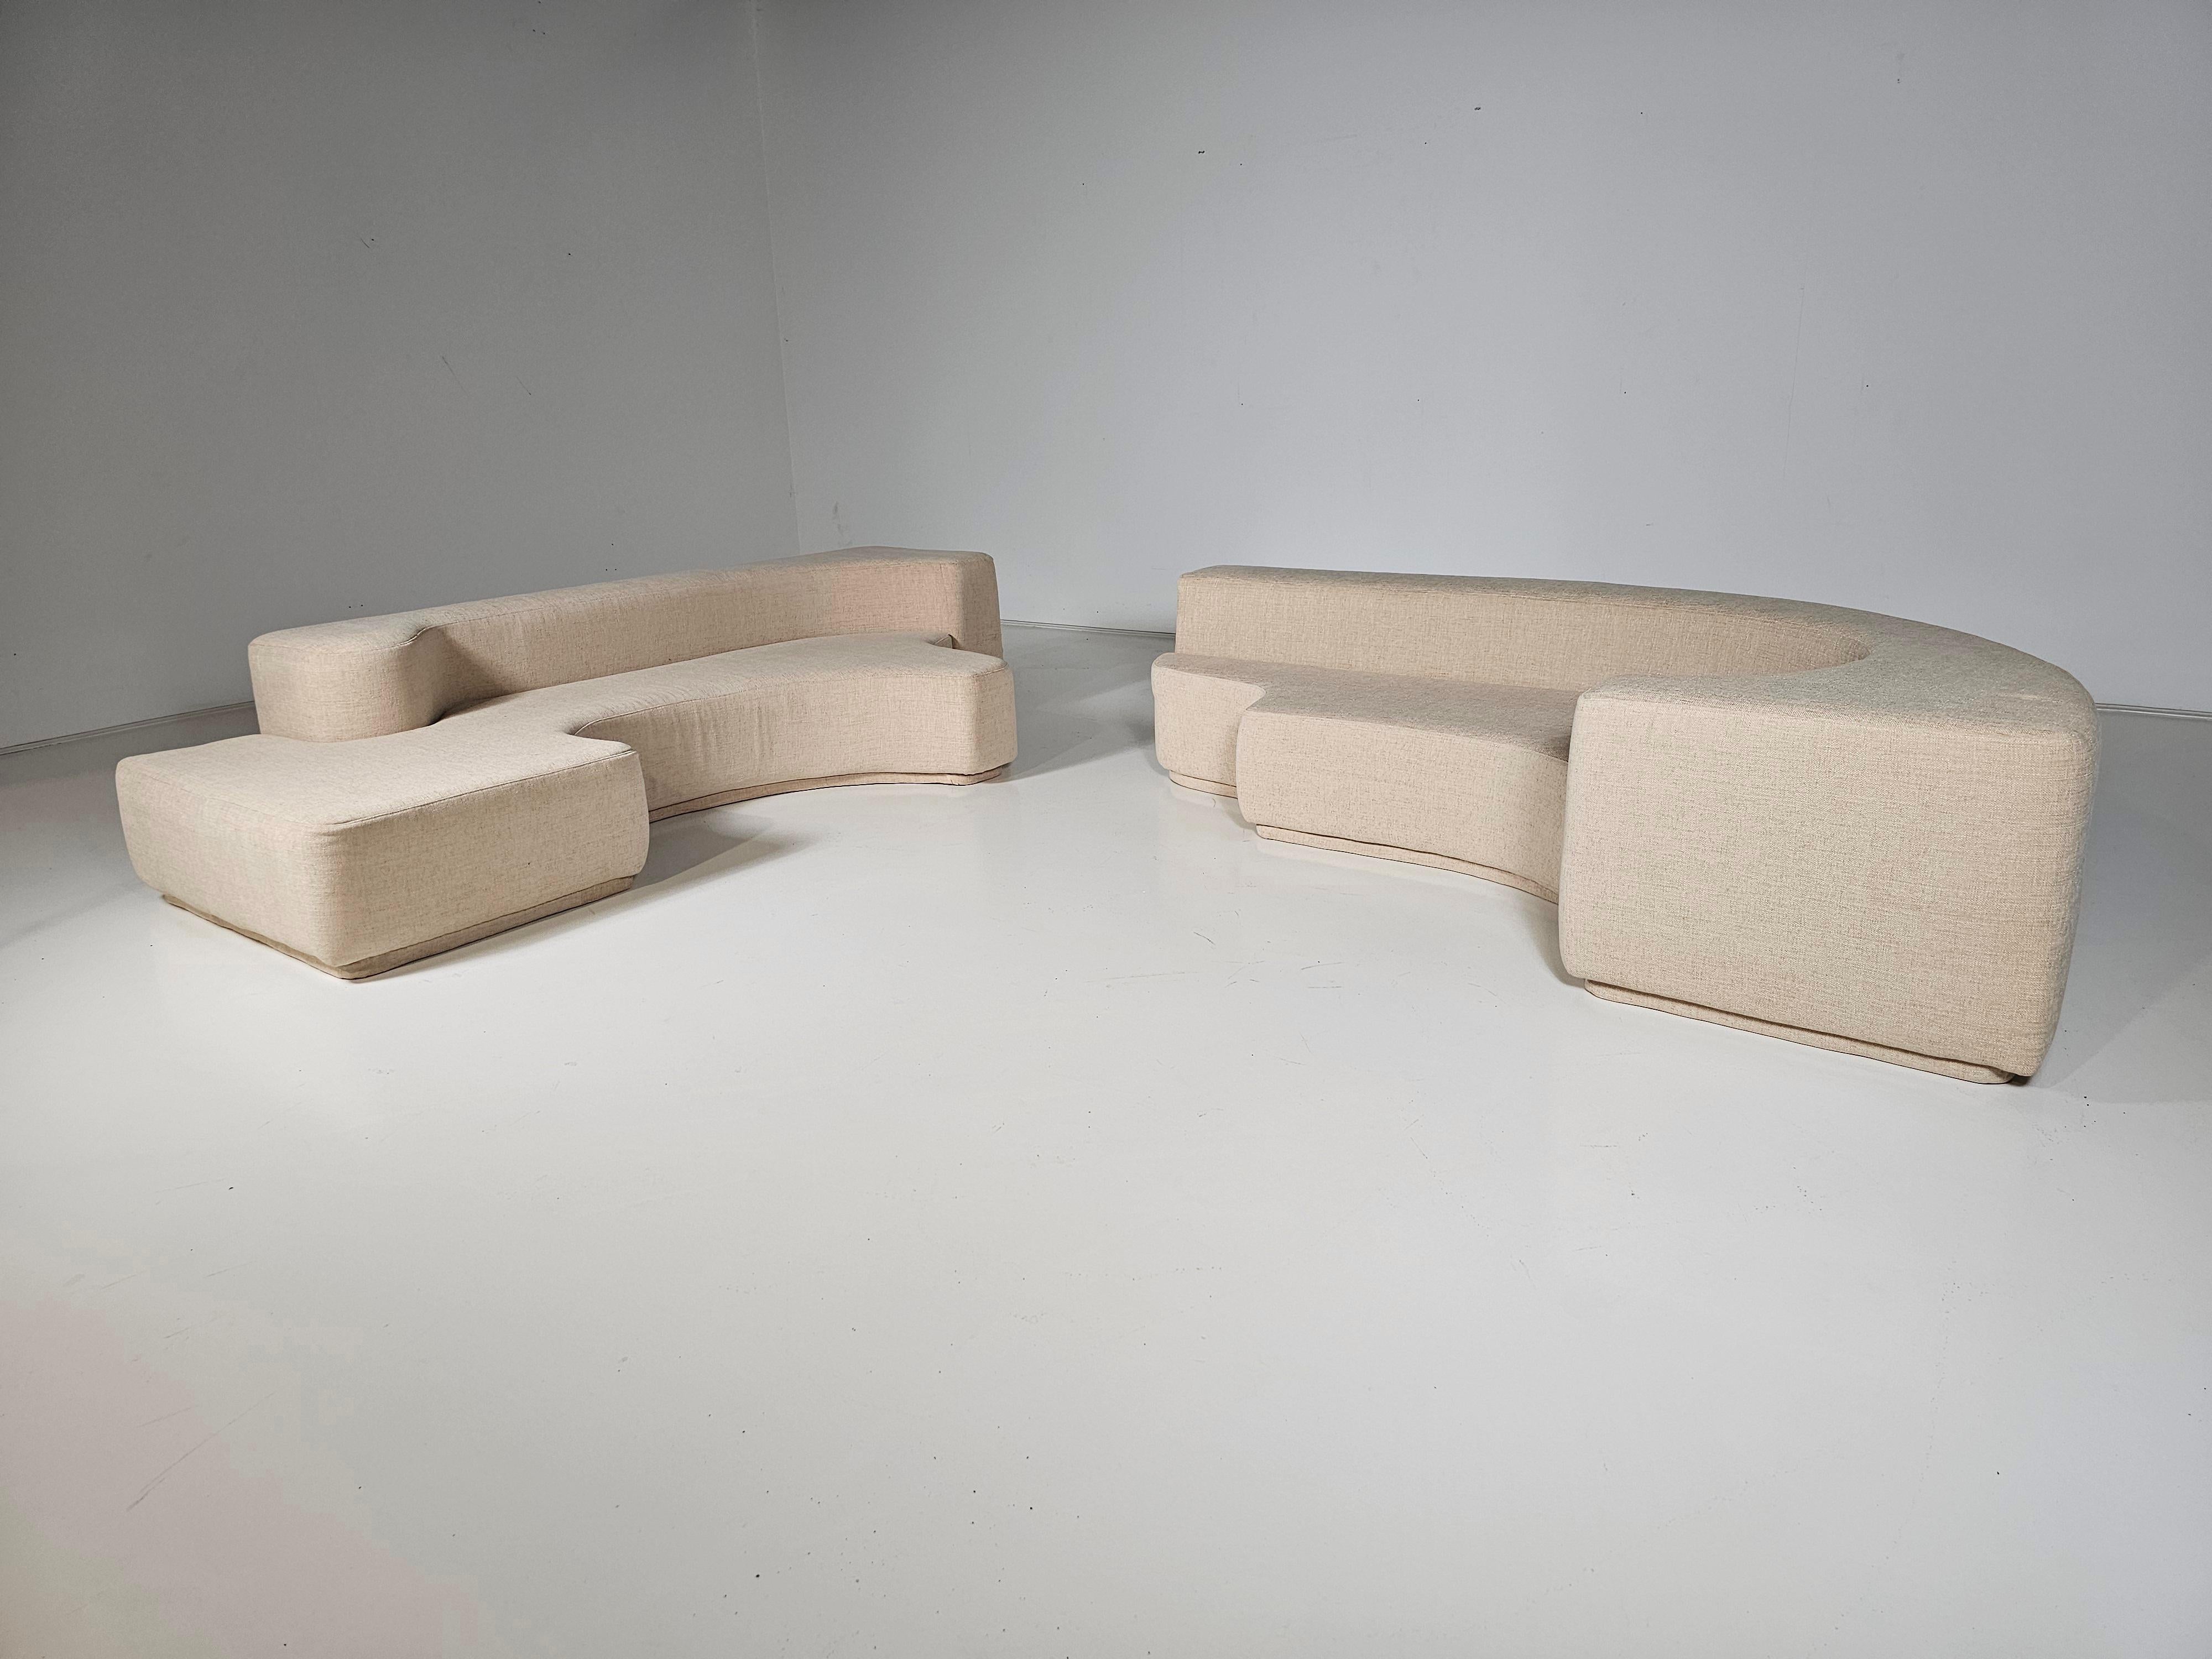 Lara Sofa in beige chenille by Pamio, Toso and Massari for Stilwood, Italy, 1960 1